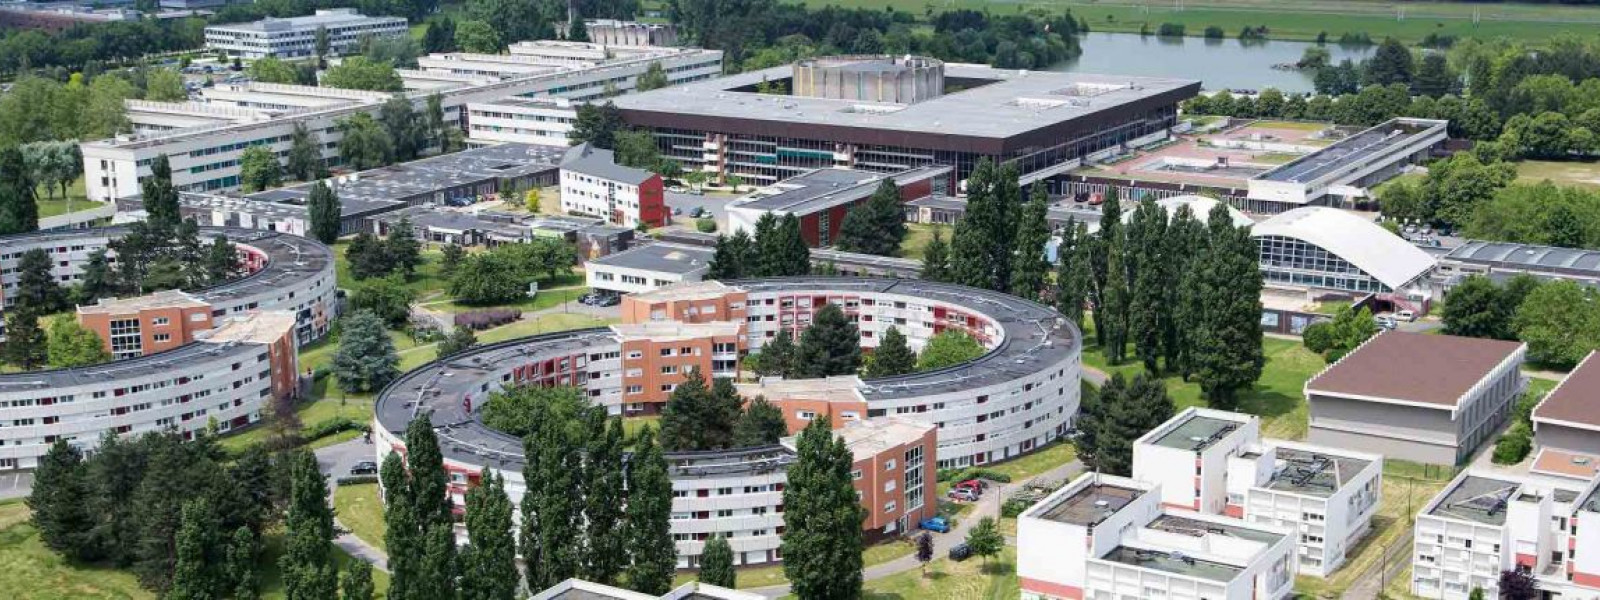 view of École Polytechnique campus from above